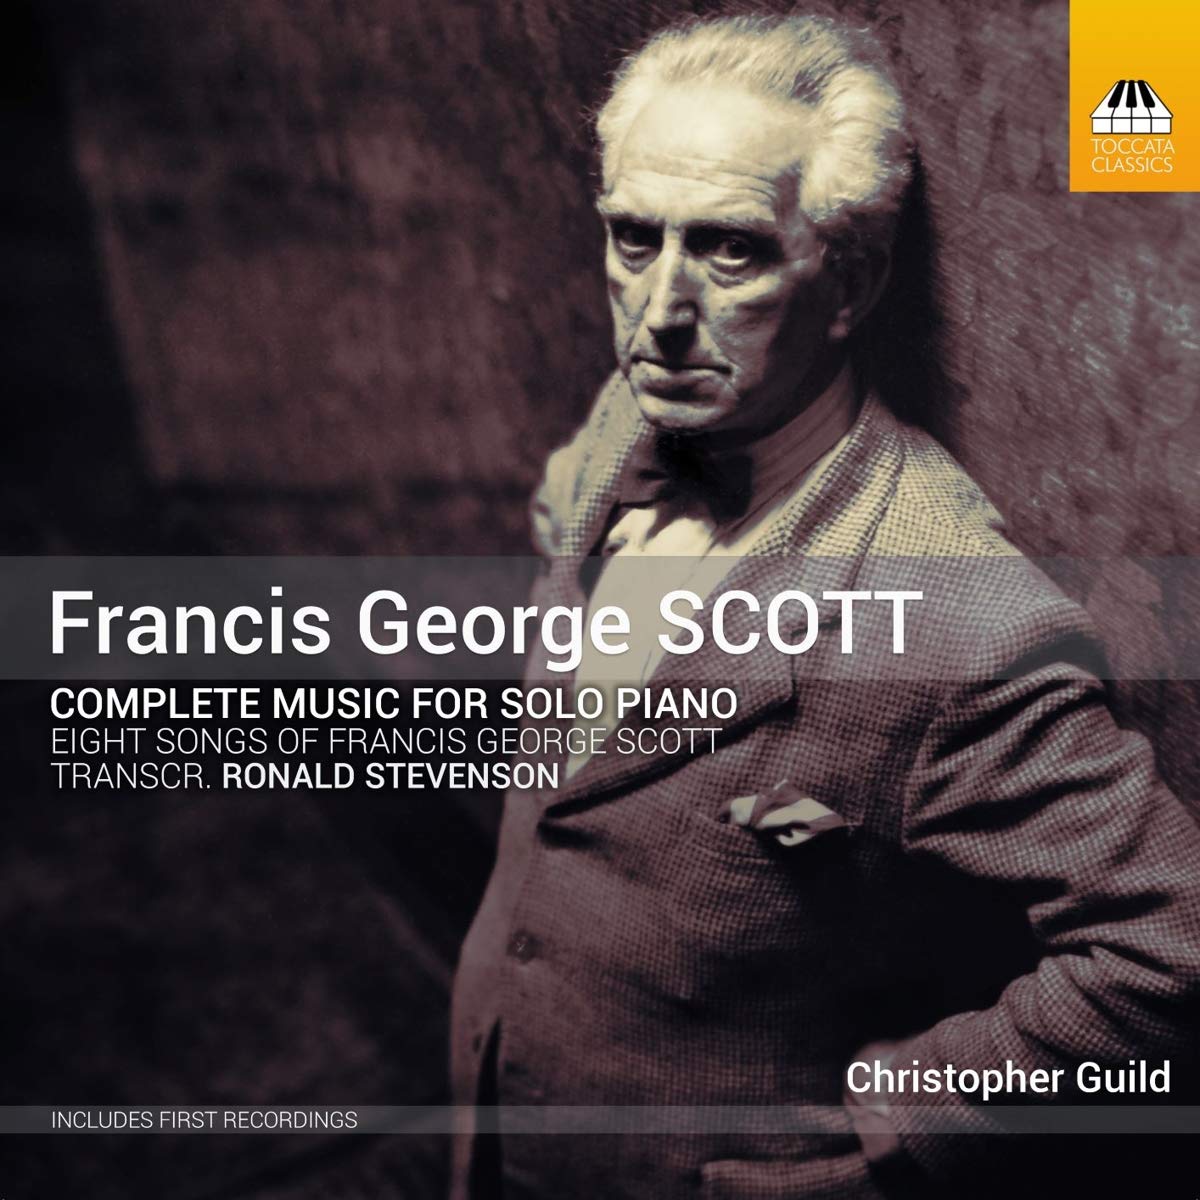 Christopher Guild – Francis George Scott – Complete Music for Solo Piano (2021) [FLAC 24bit/96kHz]